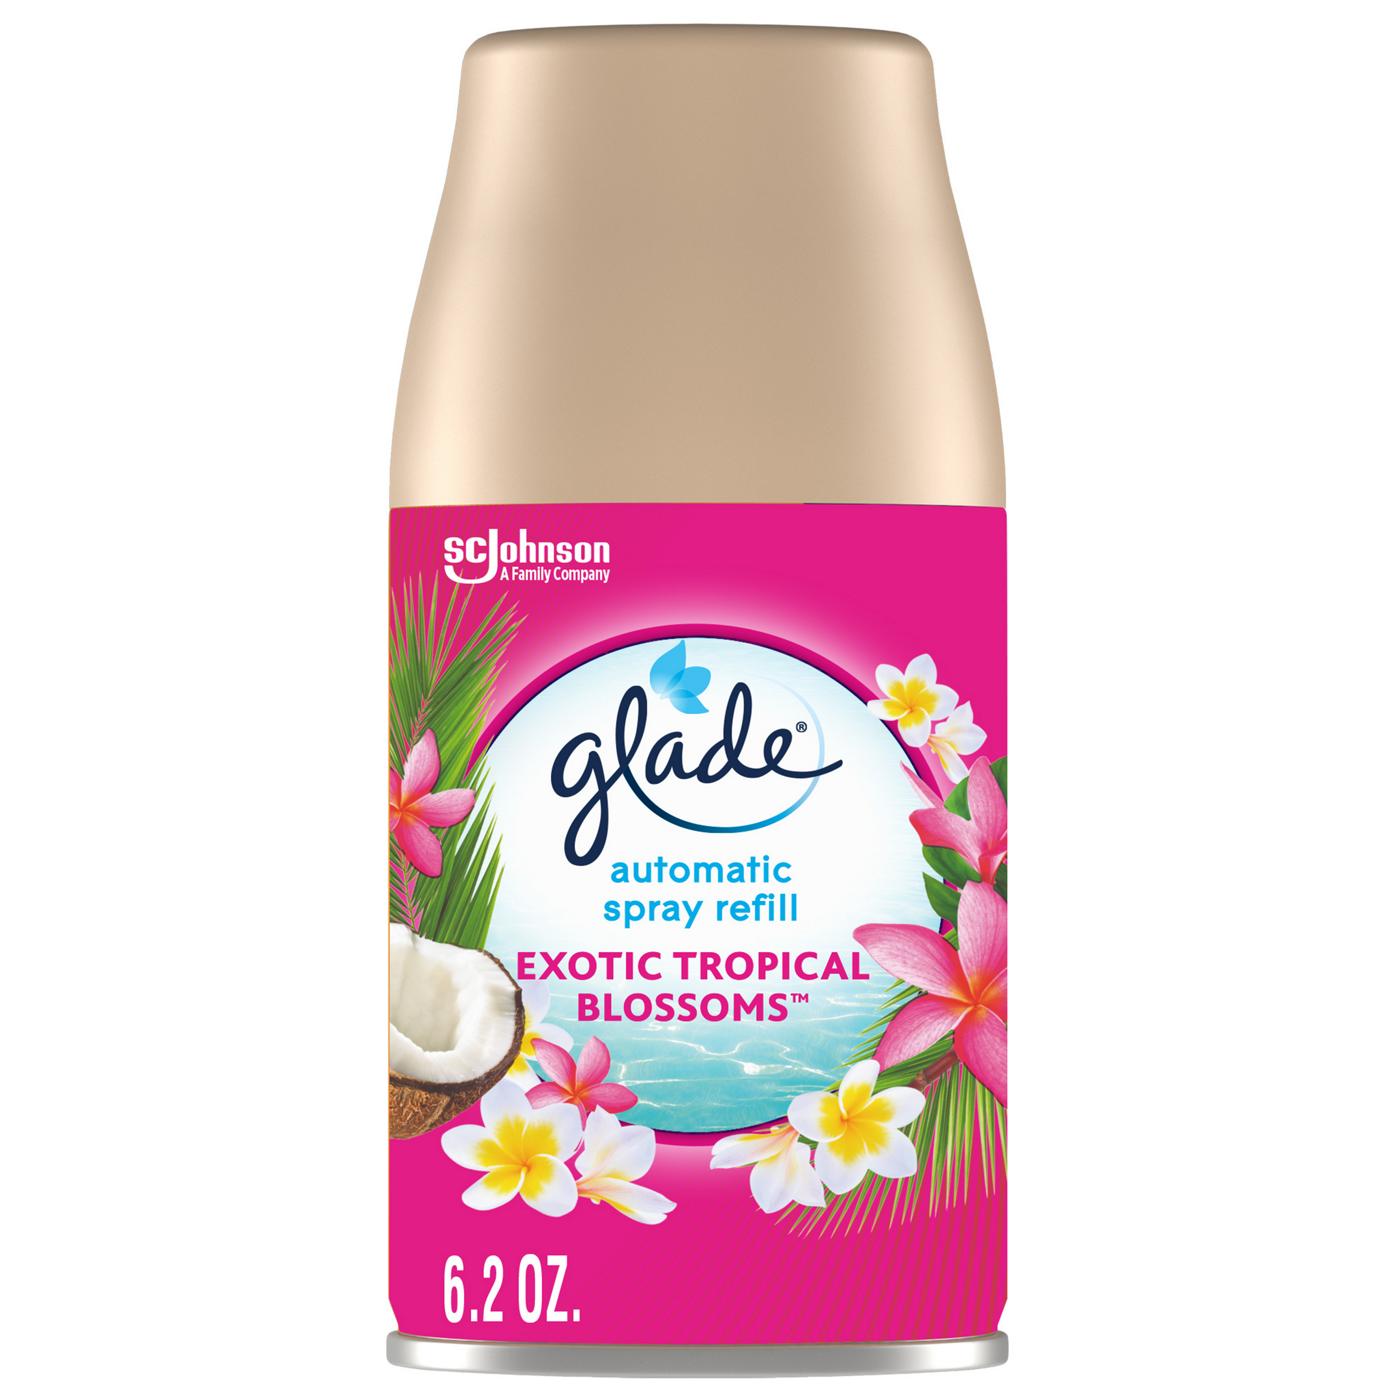 Glade Automatic Spray Refill - Exotic Tropical Blossoms; image 1 of 2